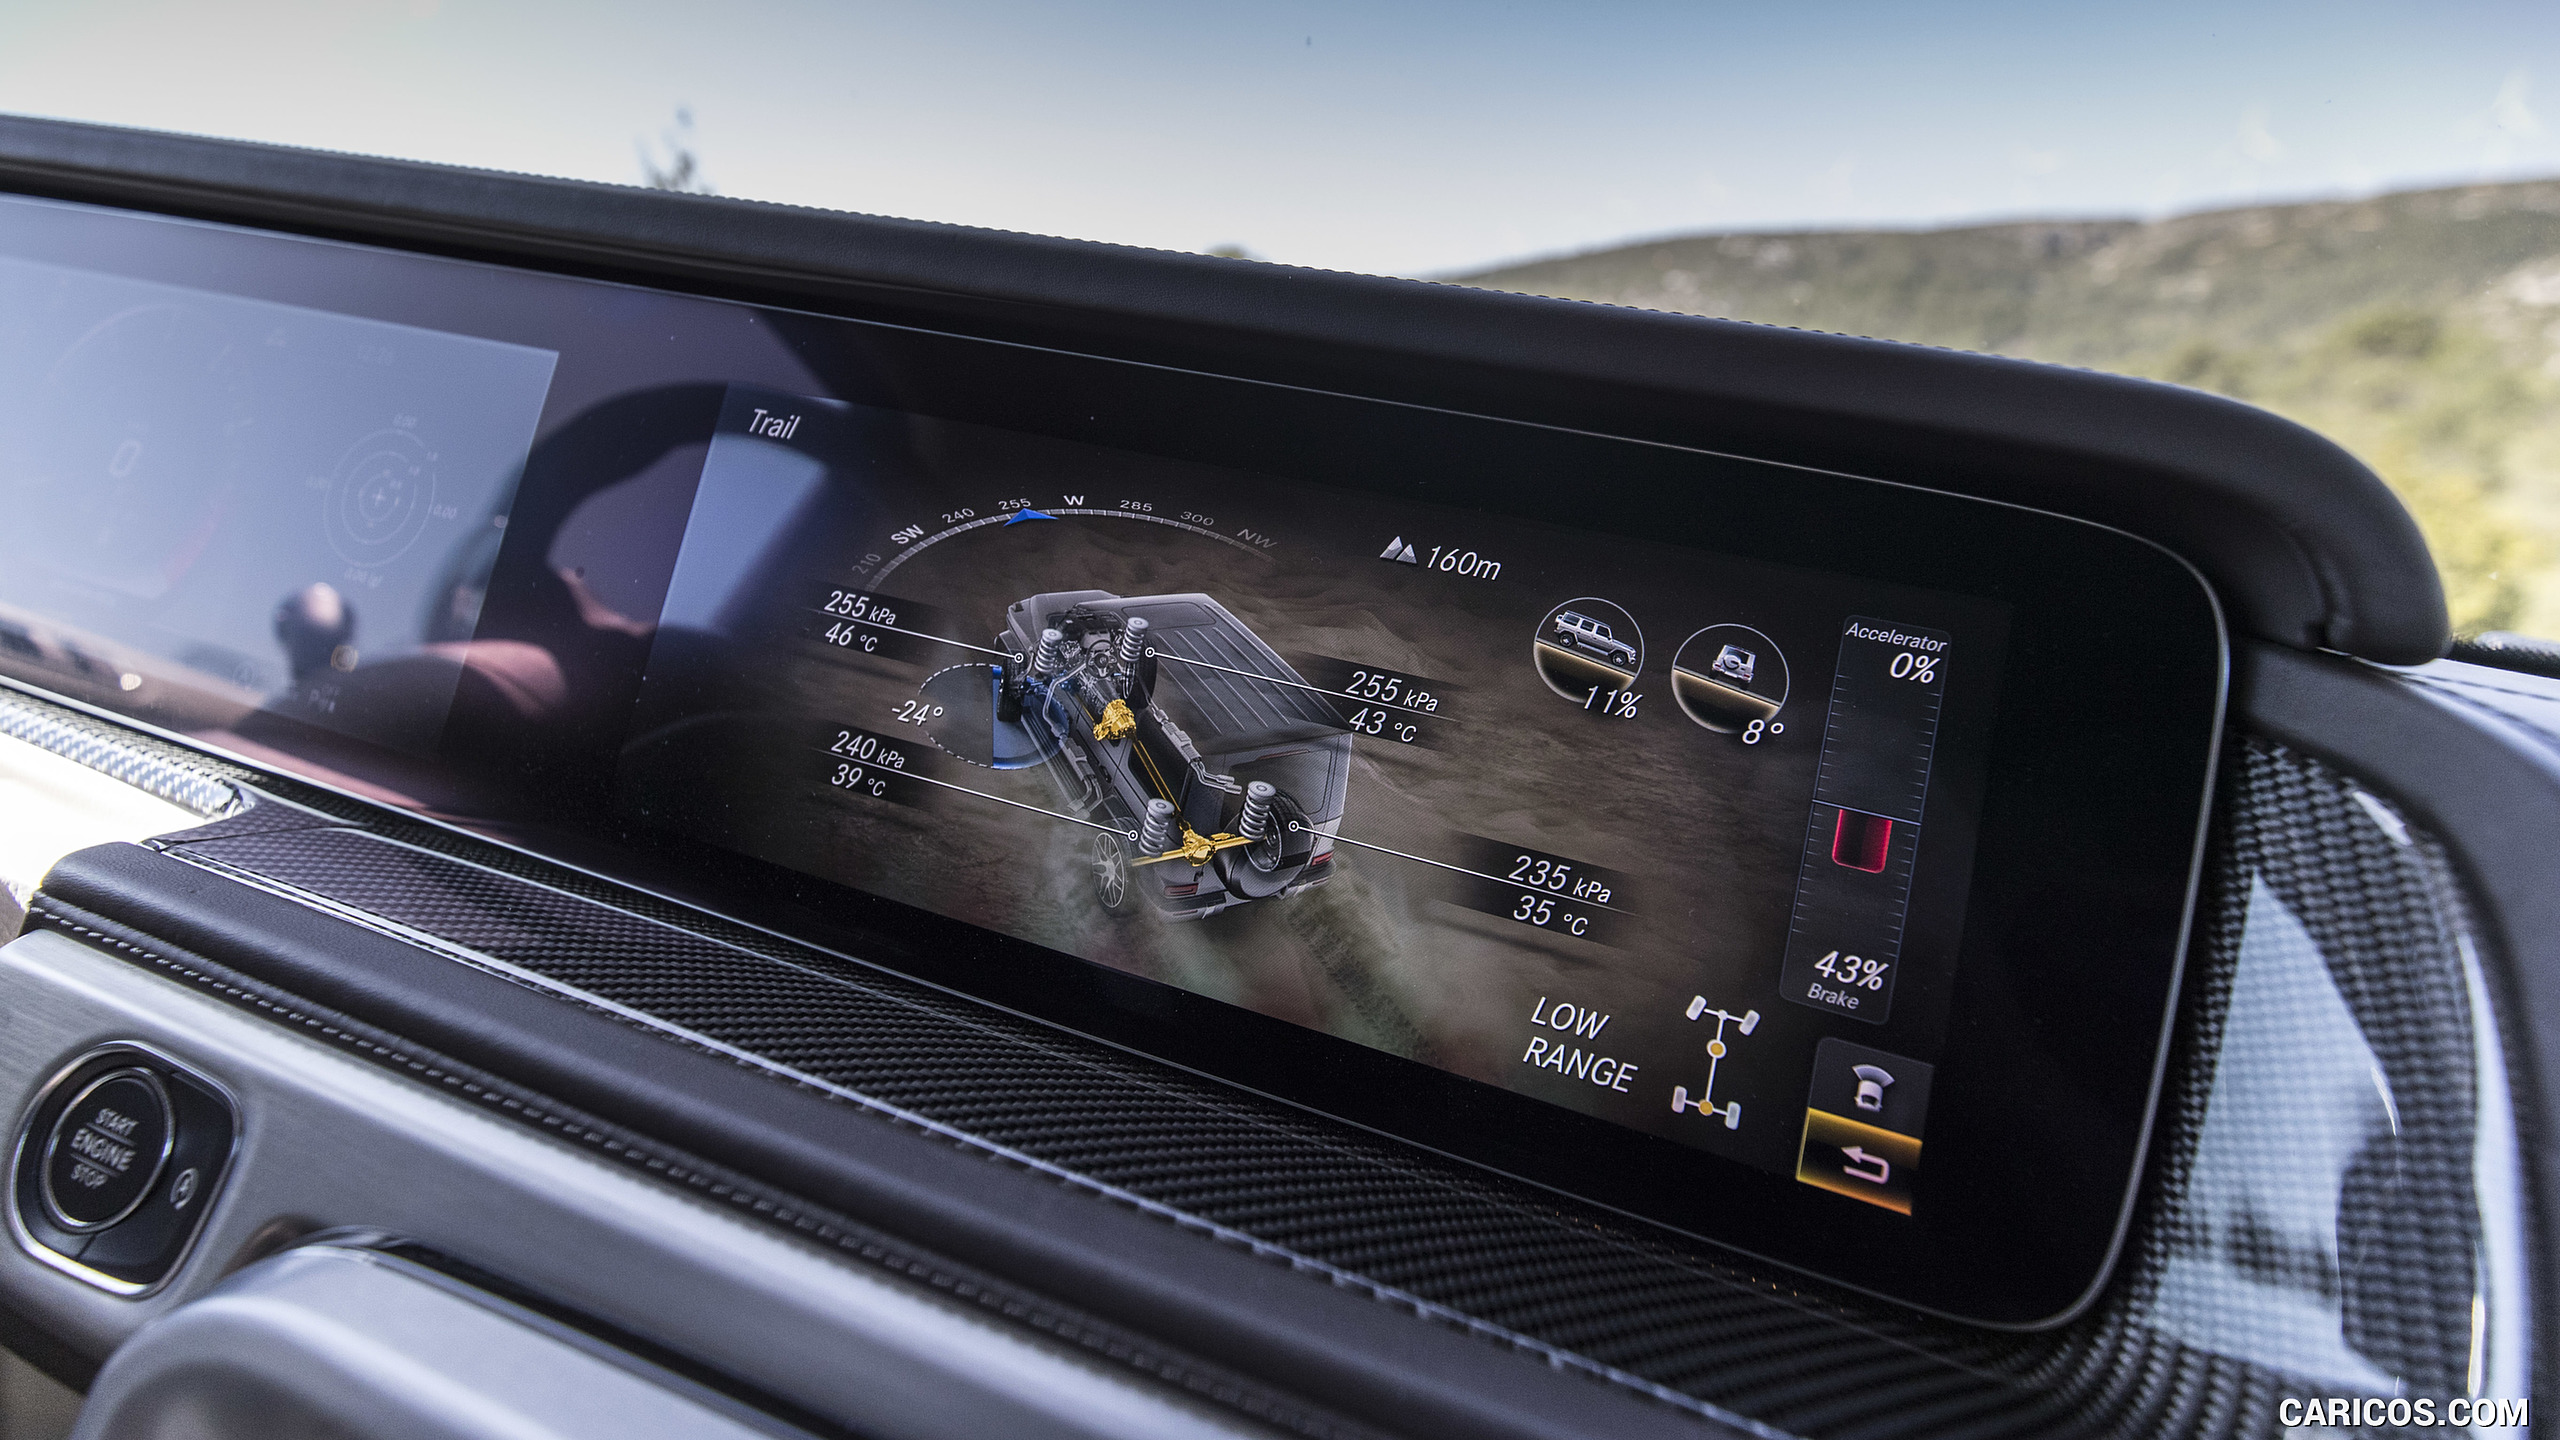 2019 Mercedes-AMG G63 - Central Console, #210 of 452